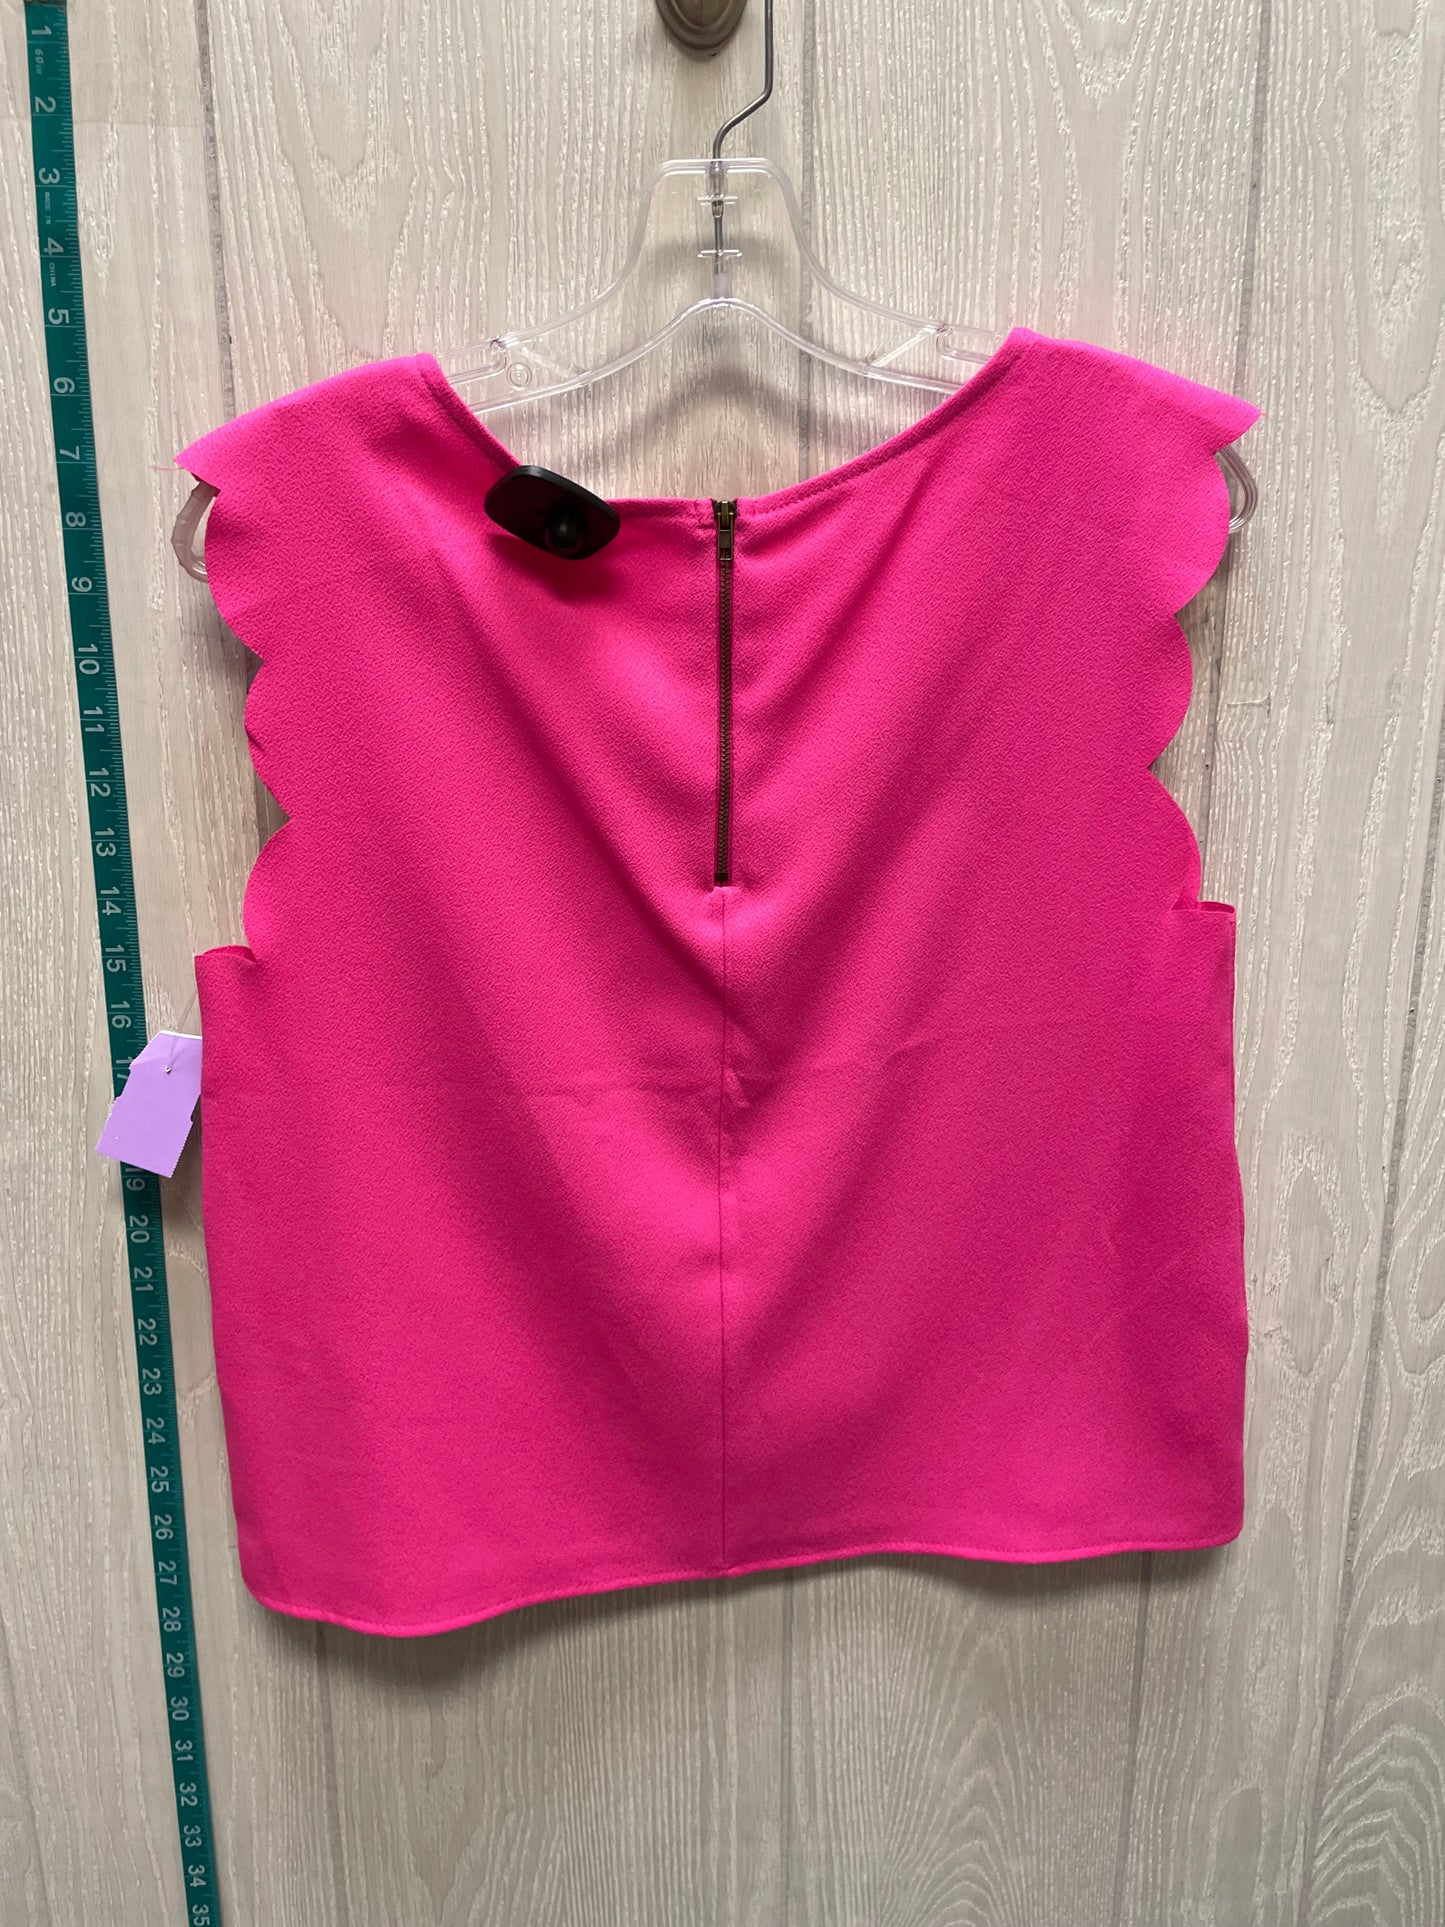 Pink Blouse Short Sleeve Everly, Size M